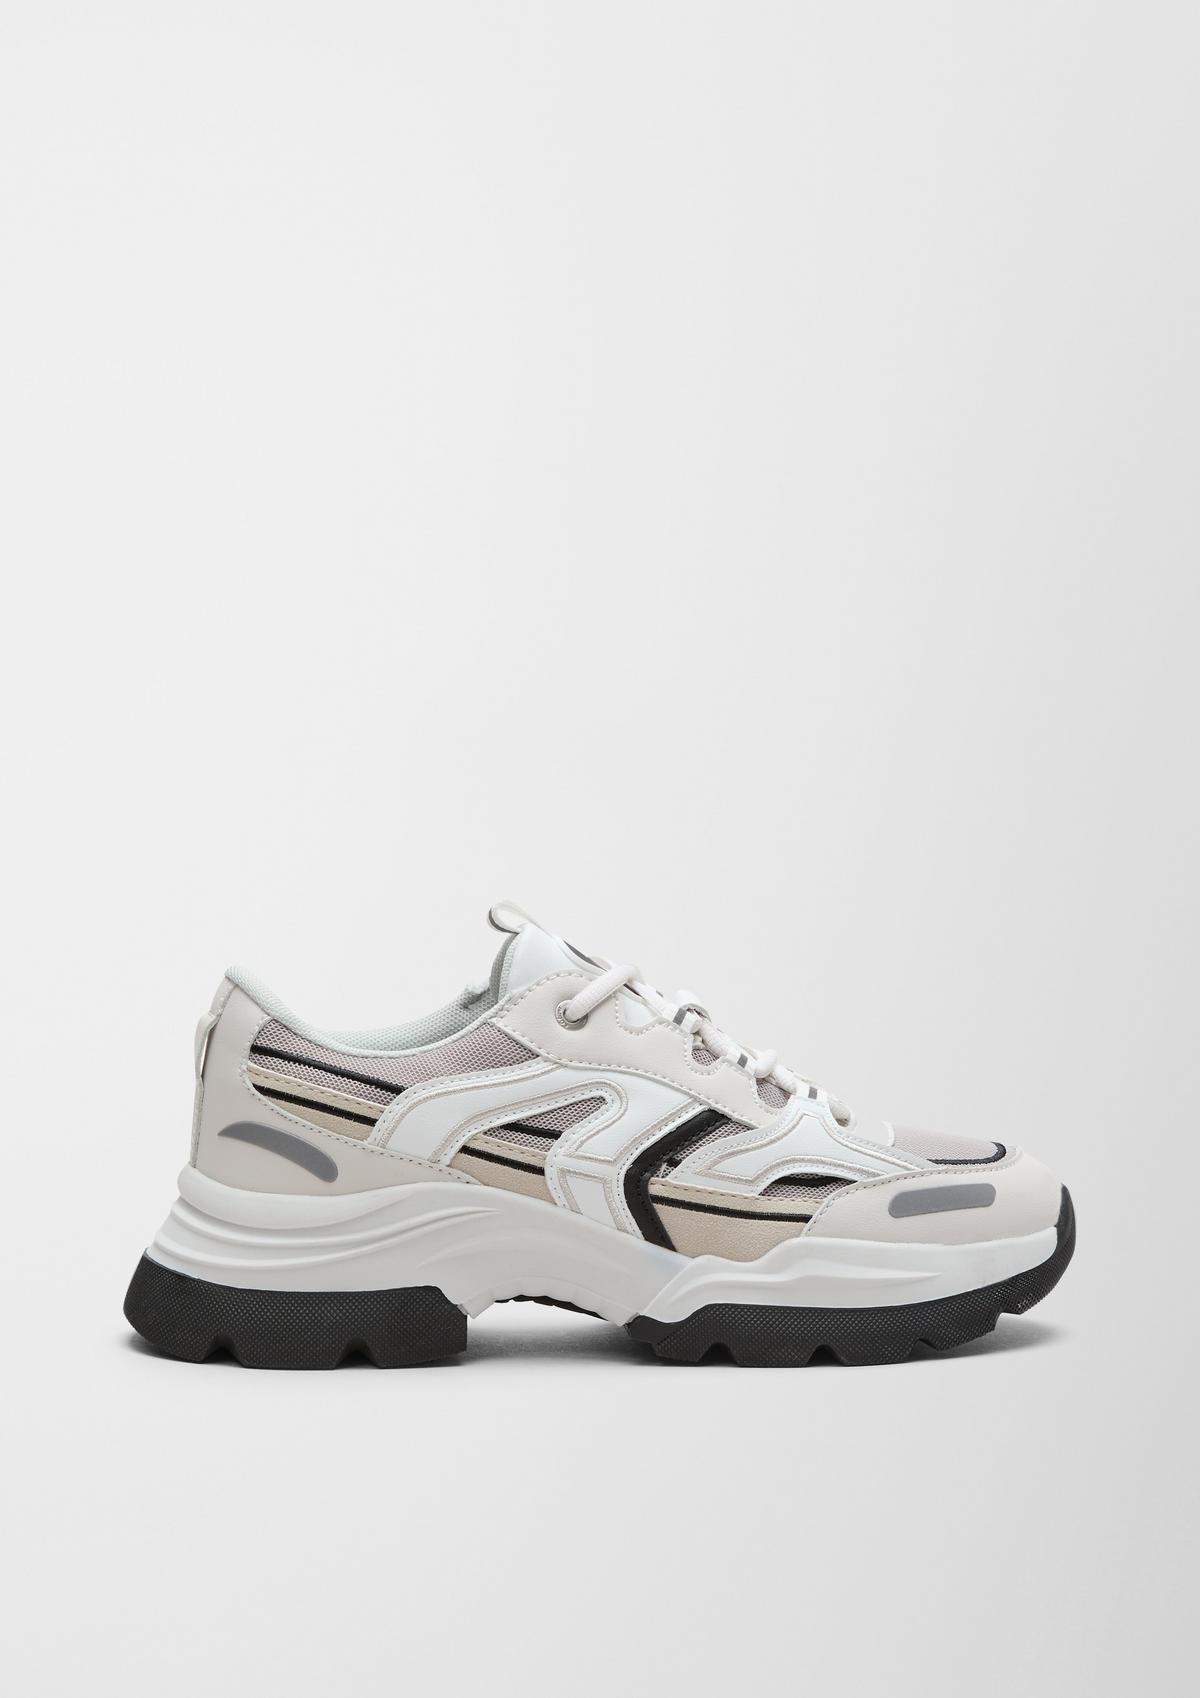 s.Oliver Chunky Sneaker im Materialmix